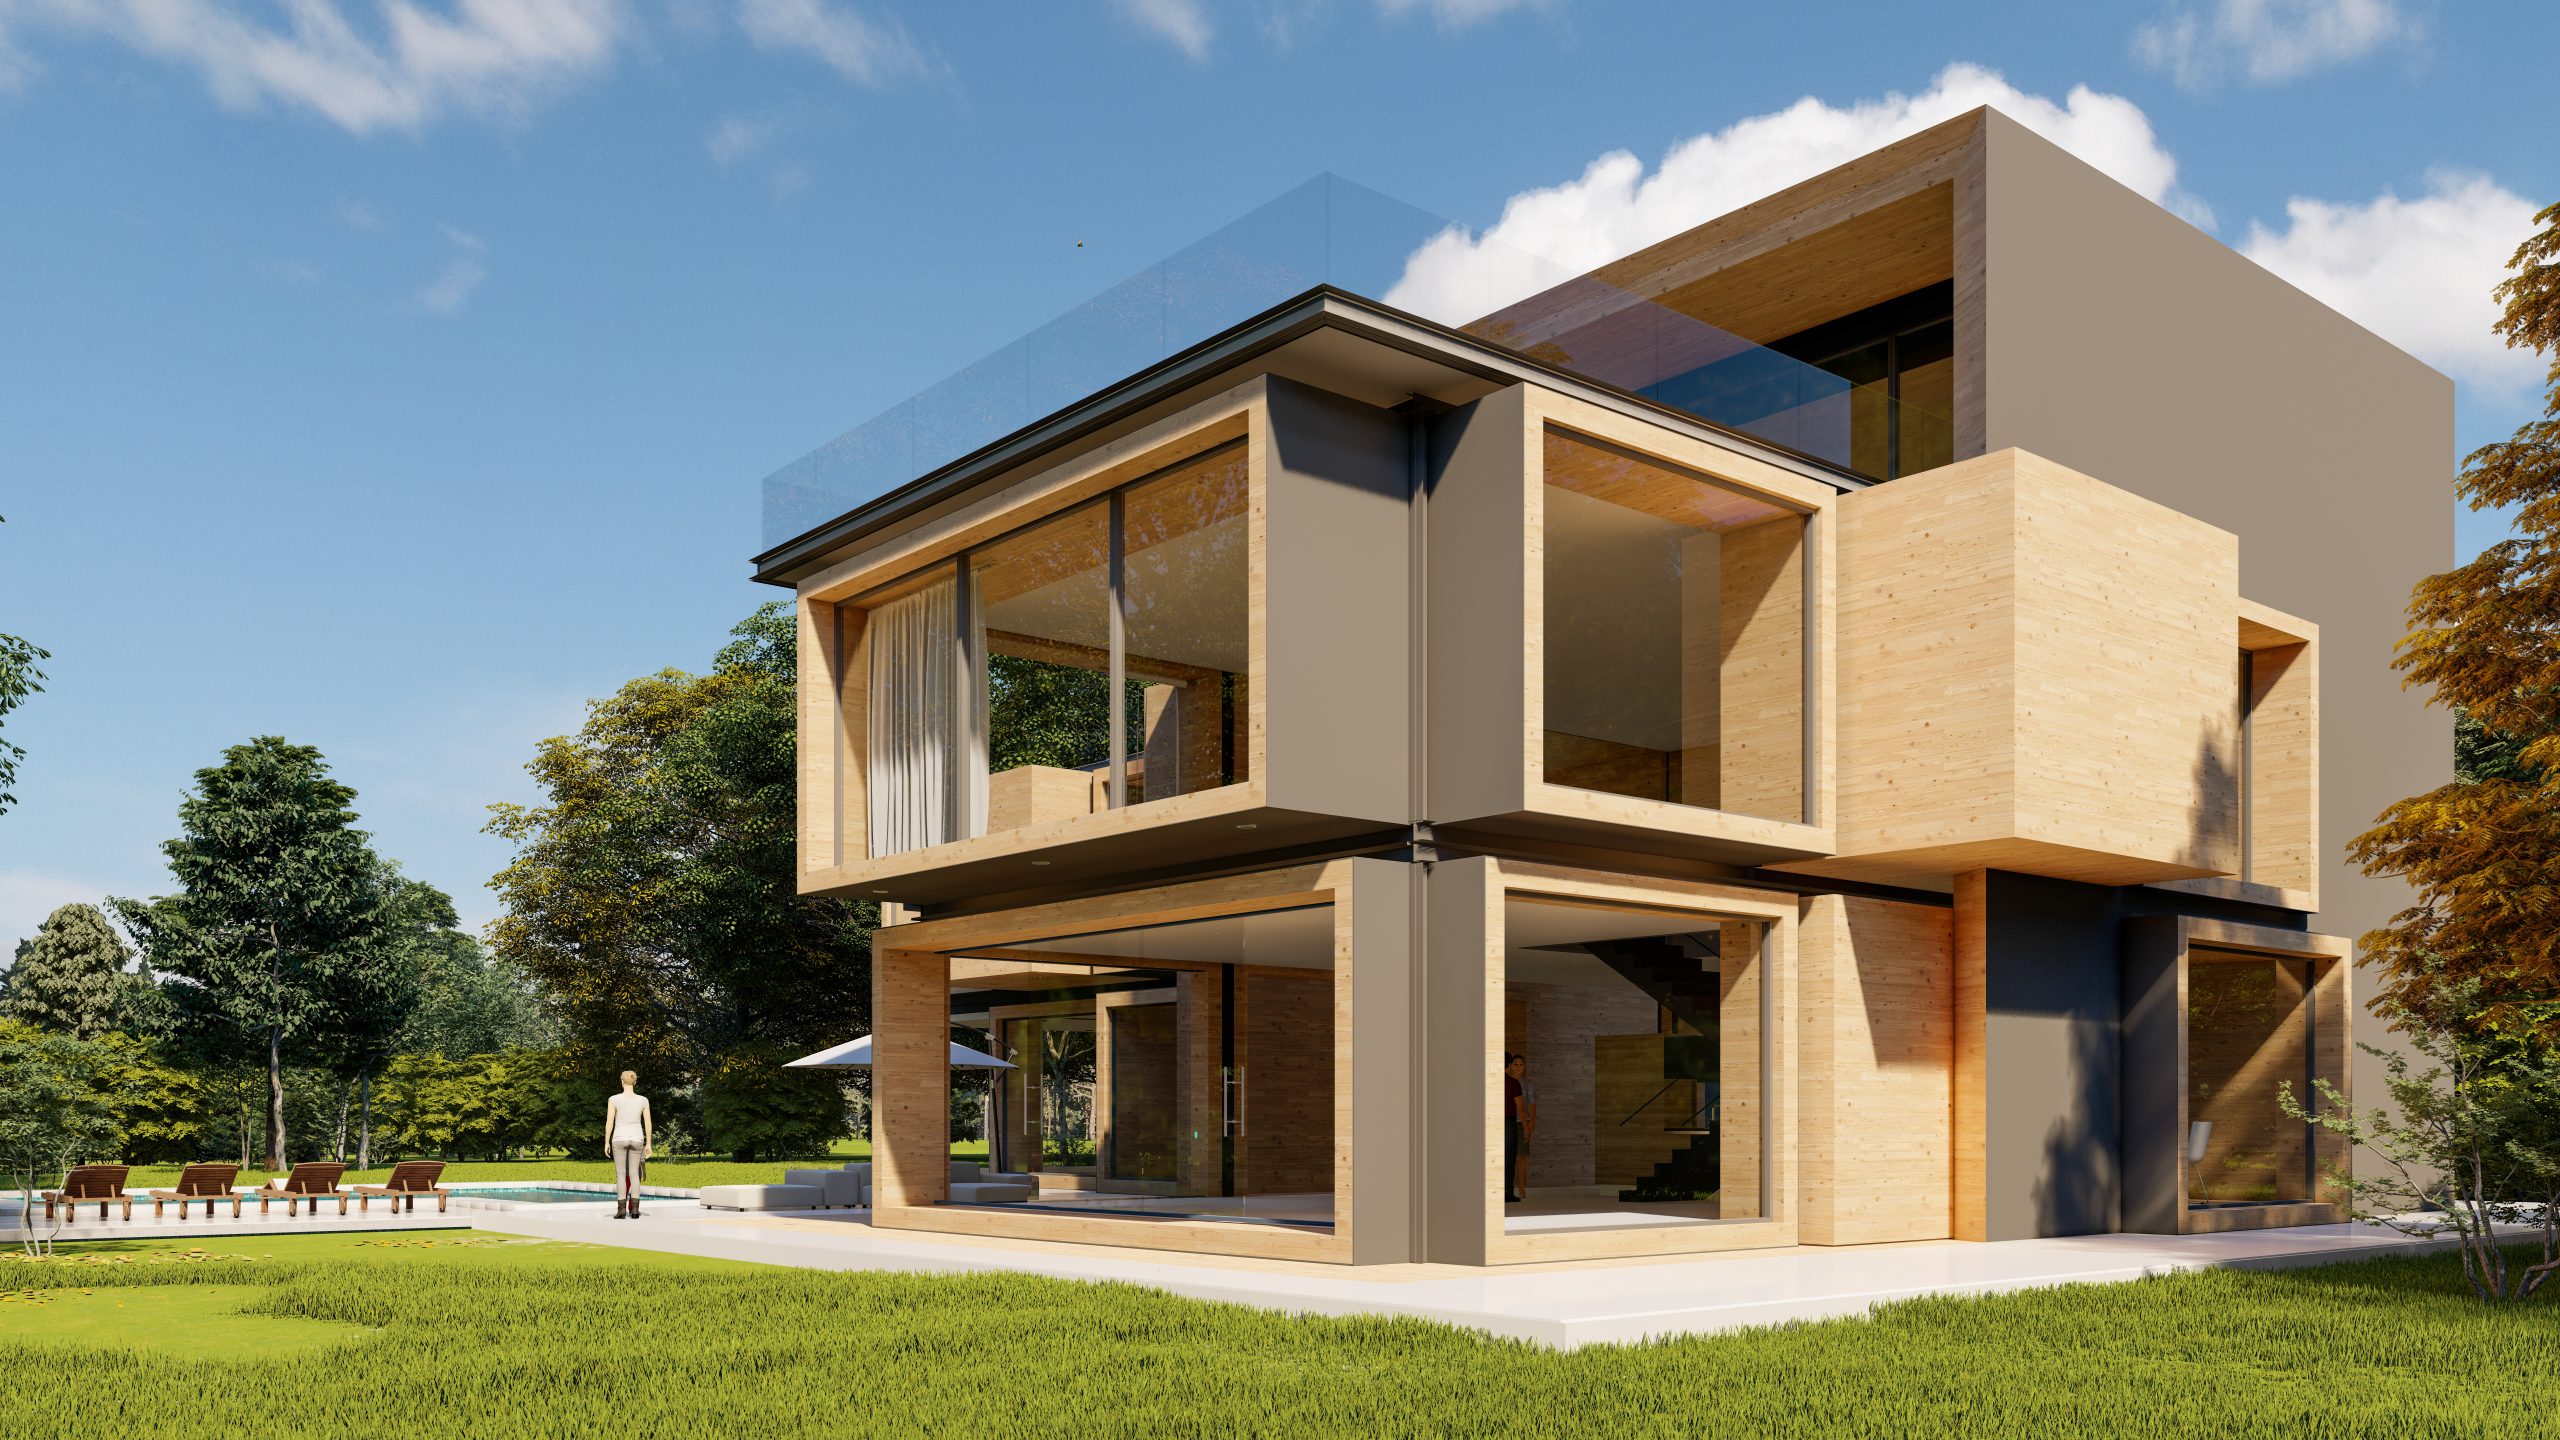 3D rendering of a large modern contemporary house in wood and concrete